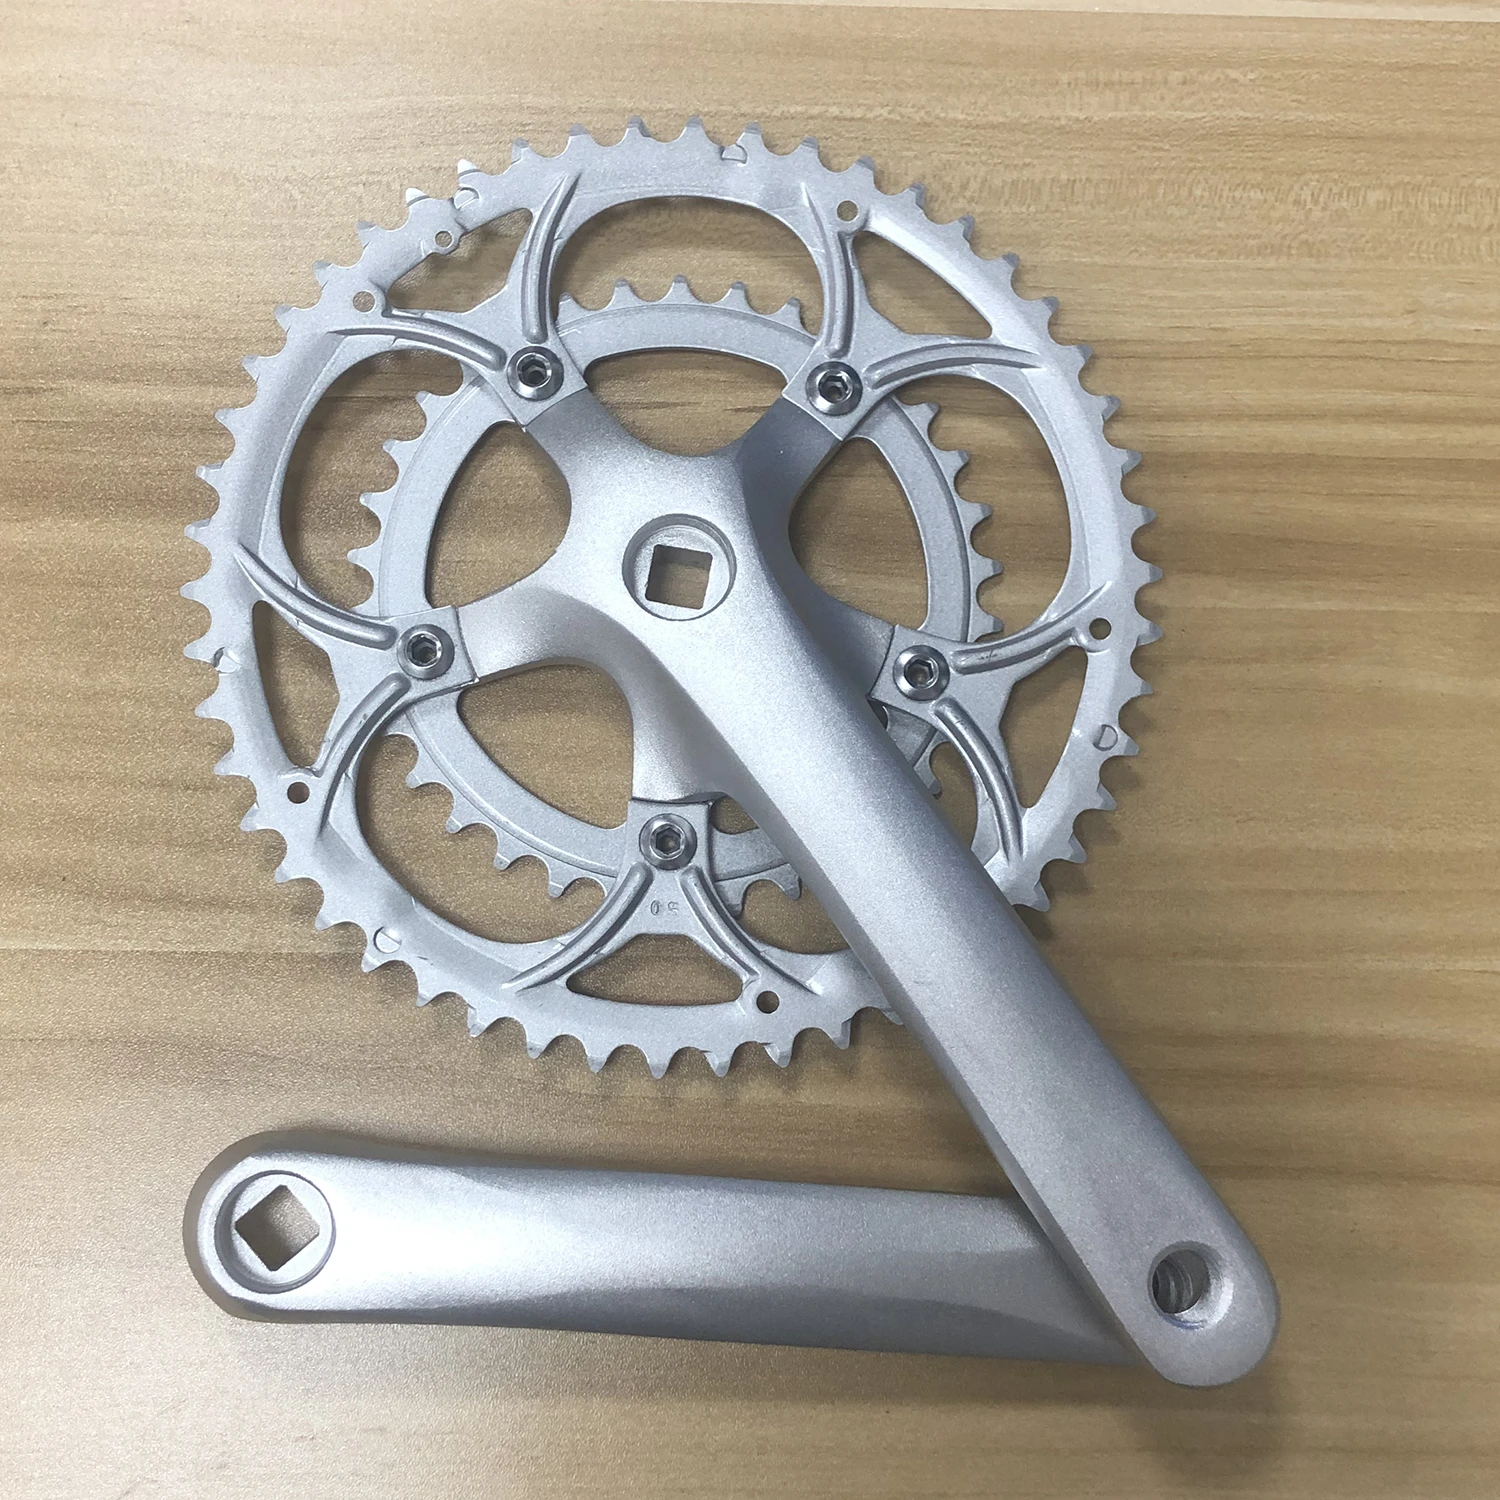 Road Bike High-end Chainwheel Bicycle Aluminum Alloy 50-34T 8/9S Chainring Square Hole Racing 170mm Crank Cycling Parts Crankset